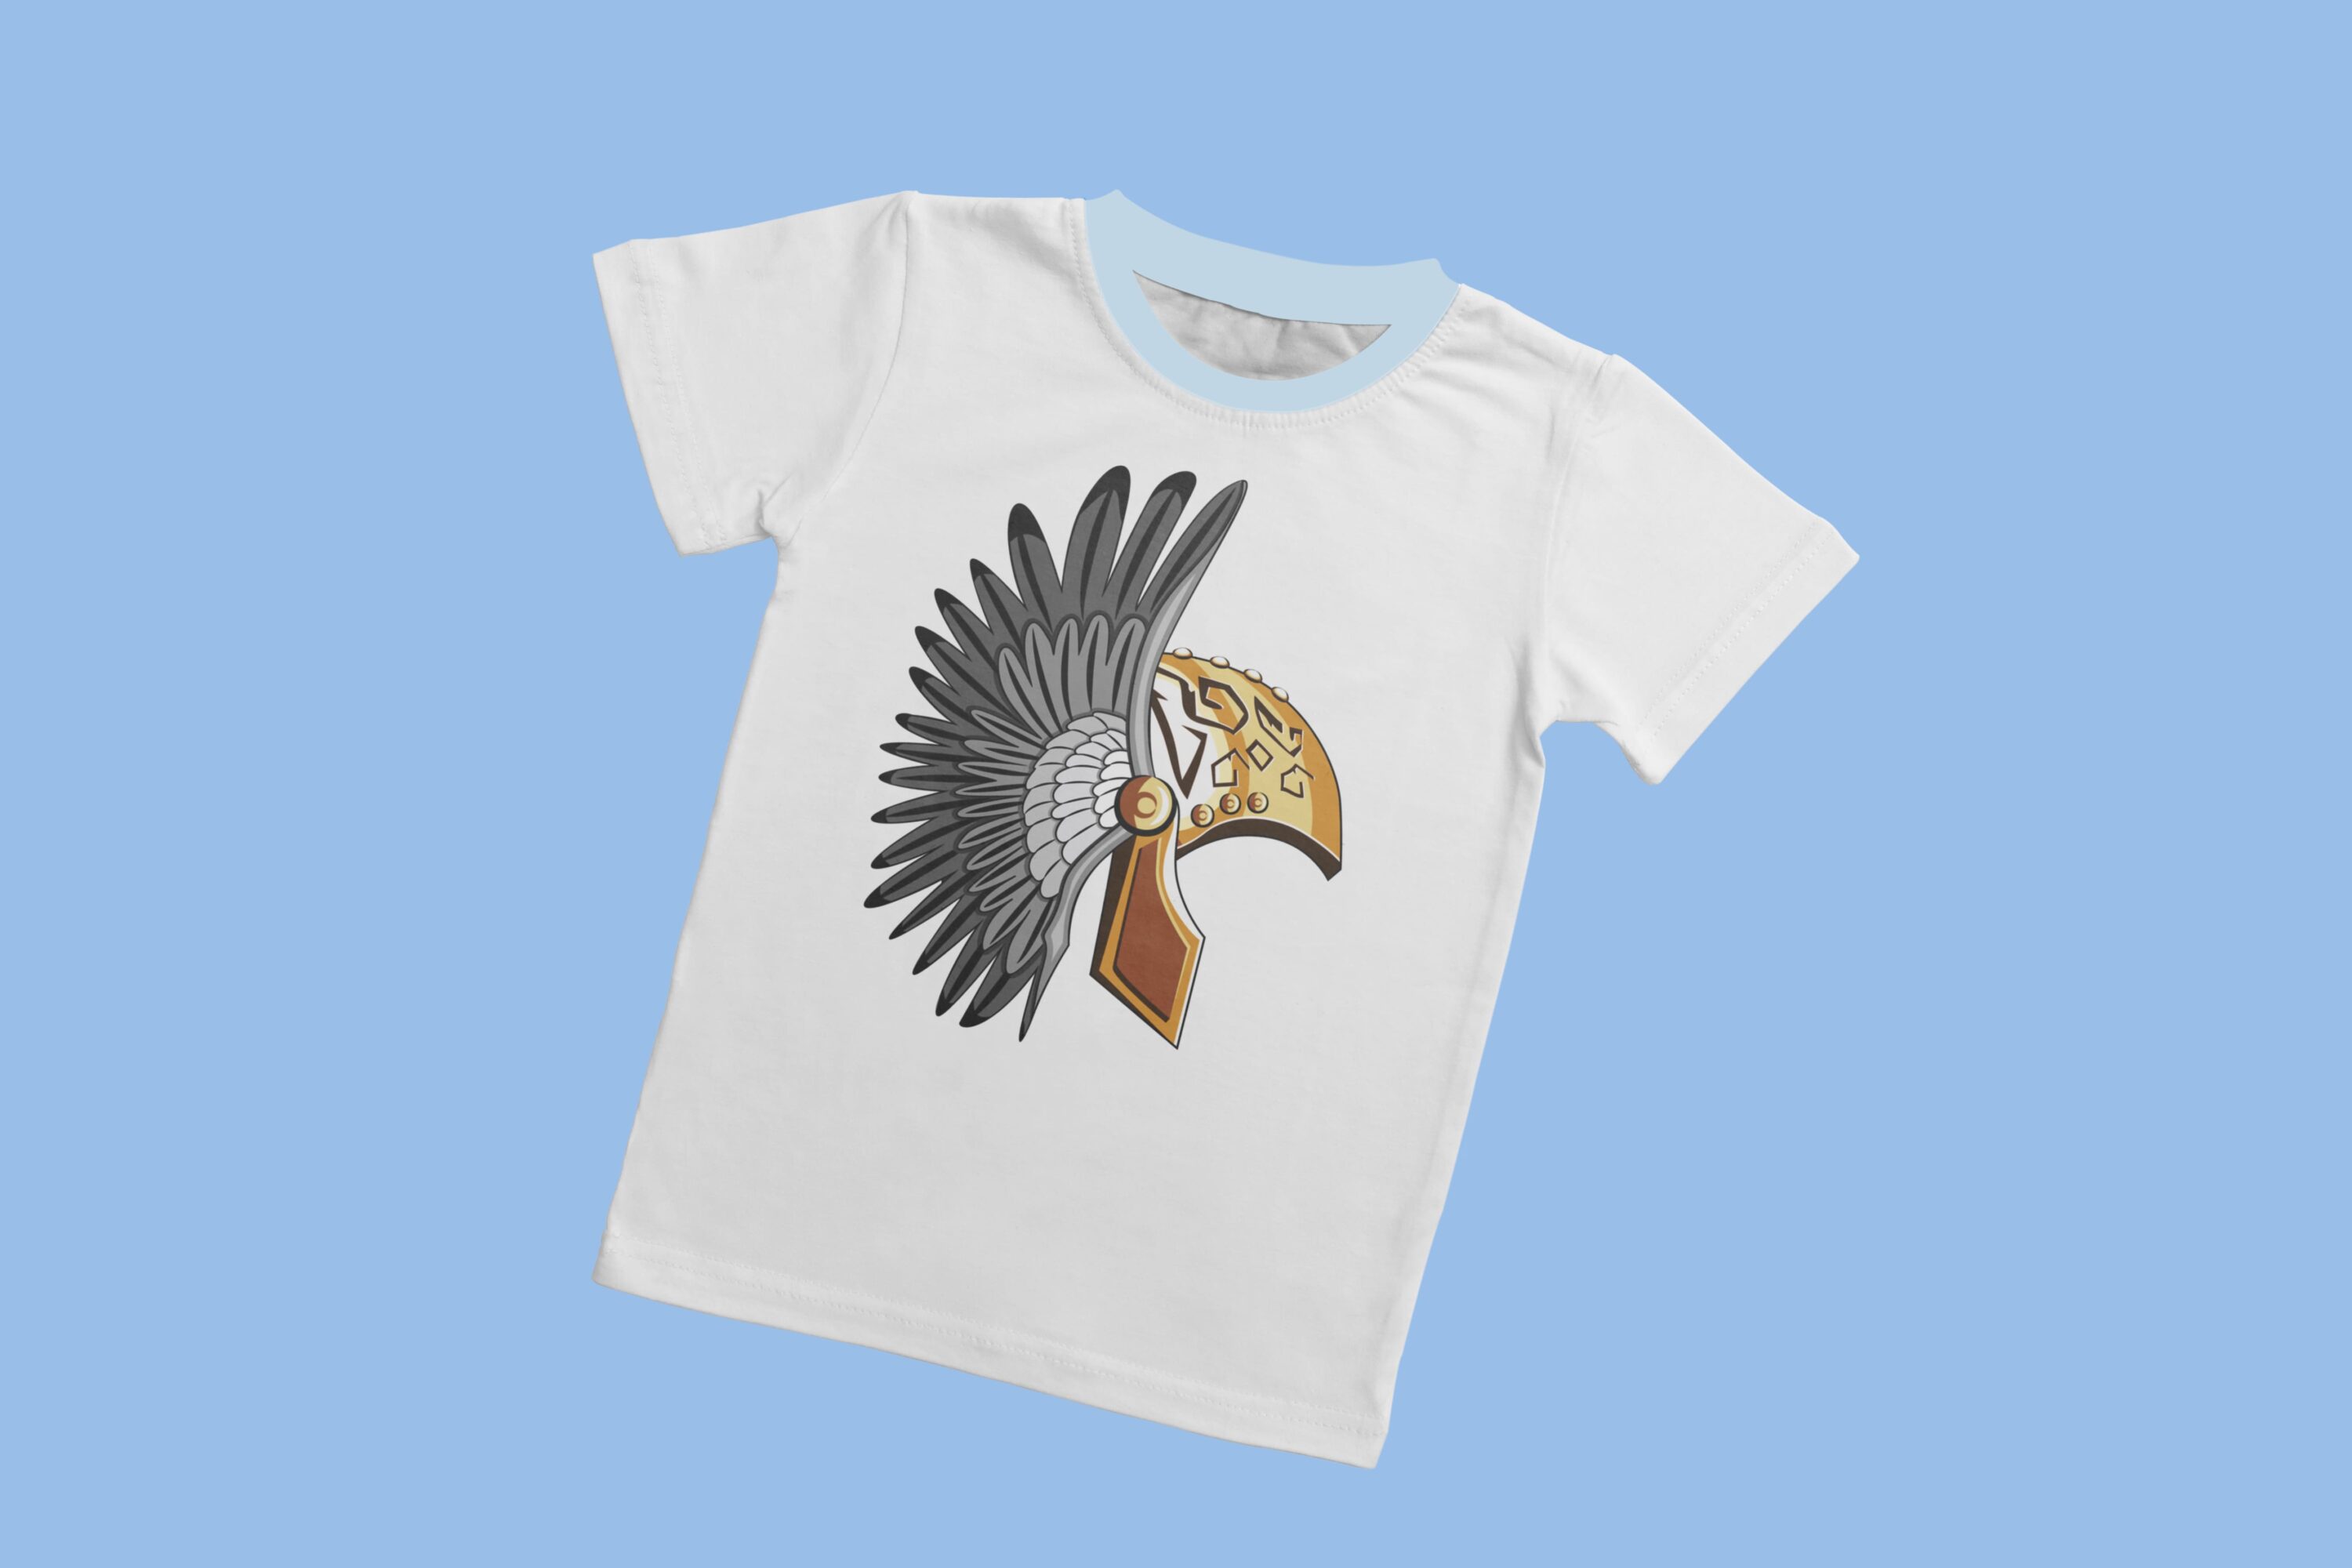 Viking helmet with the wings on the white t-shirt.